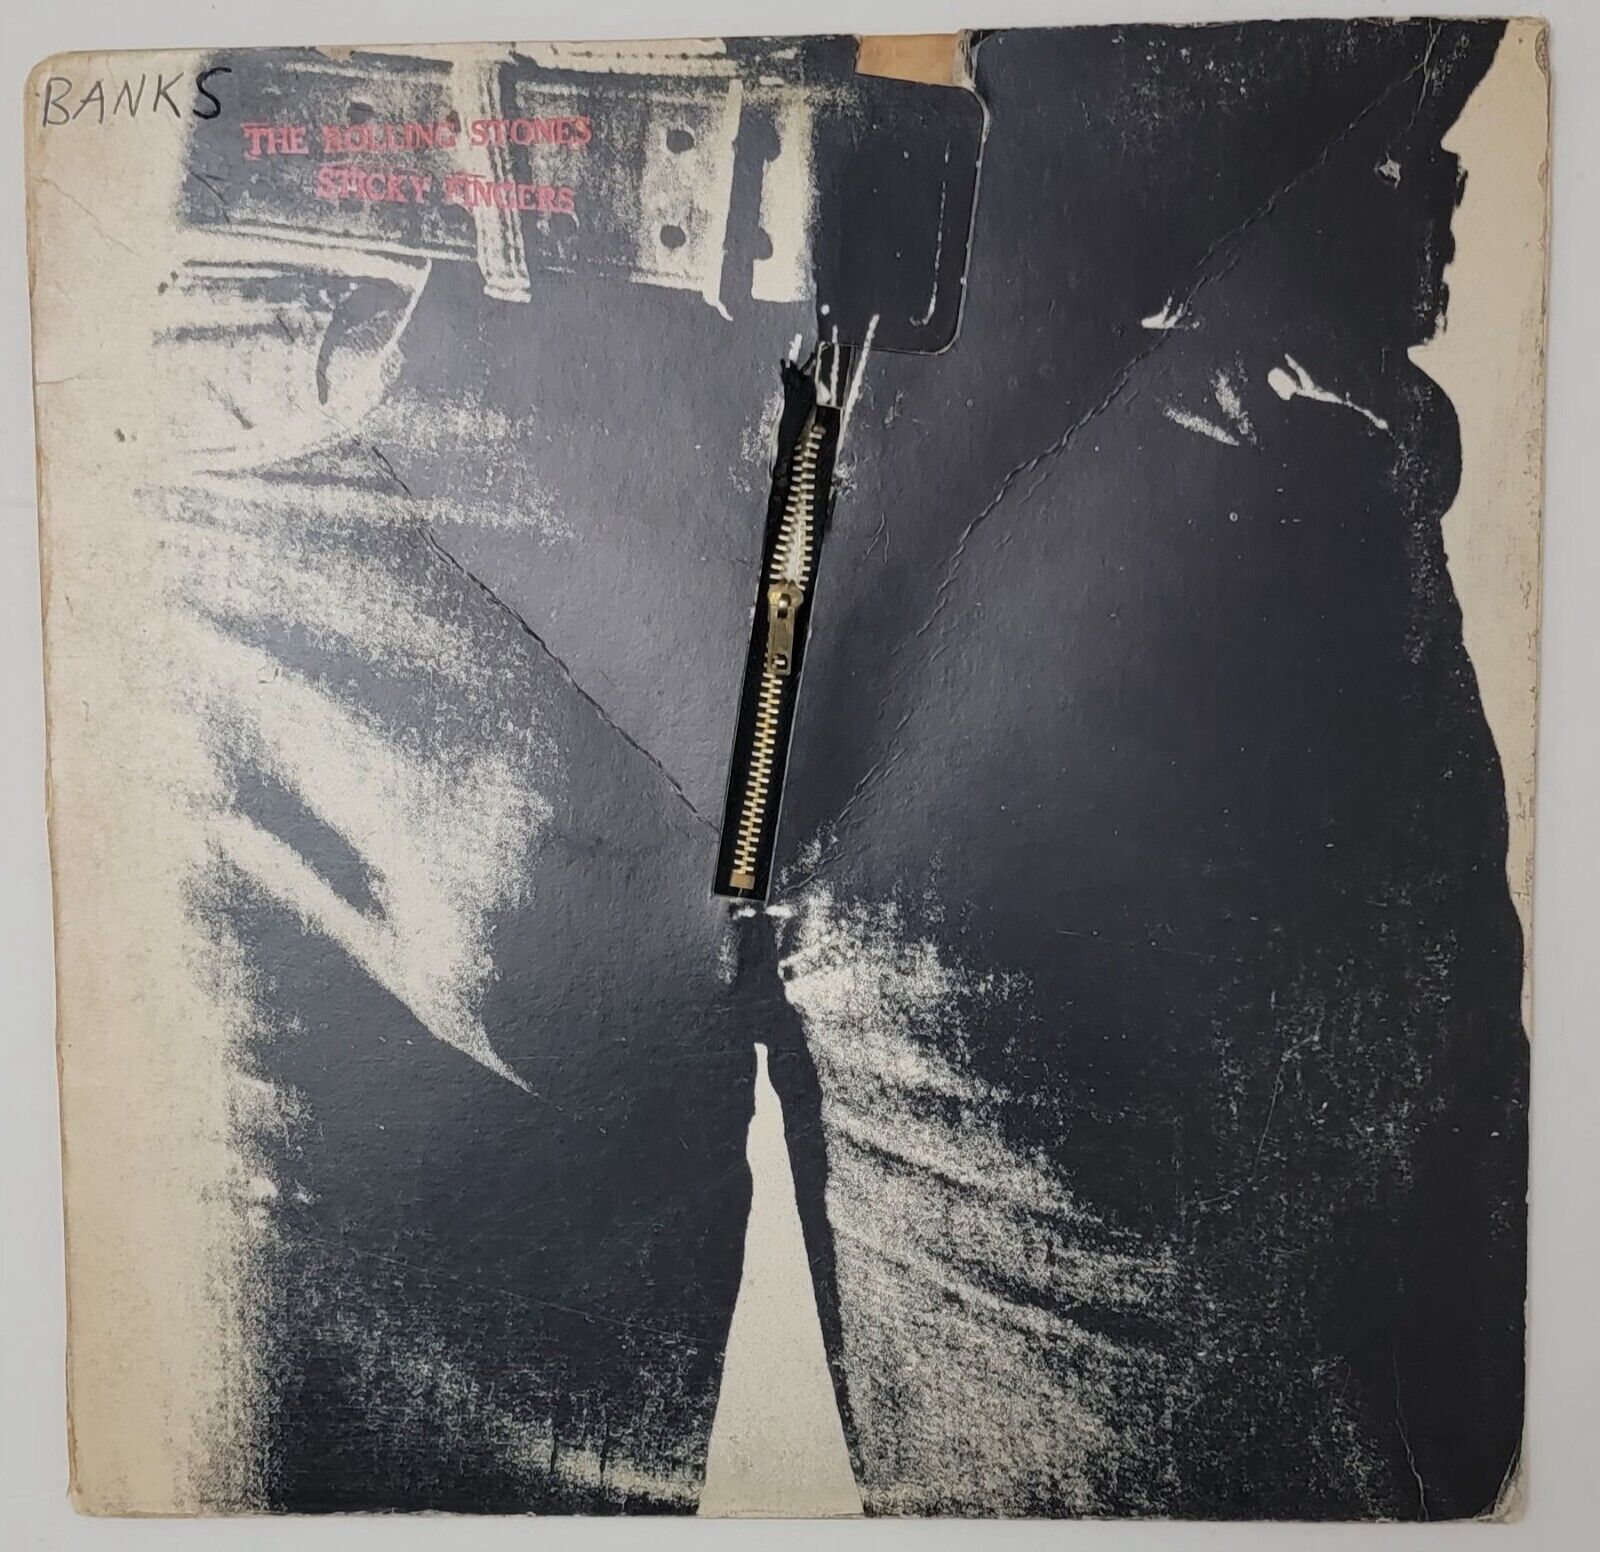 ROLLING STONES STICKY FINGERS LP 1971 ~ ZIPPER ~*ANDY WARHOL STAMP* COC  59100 LP